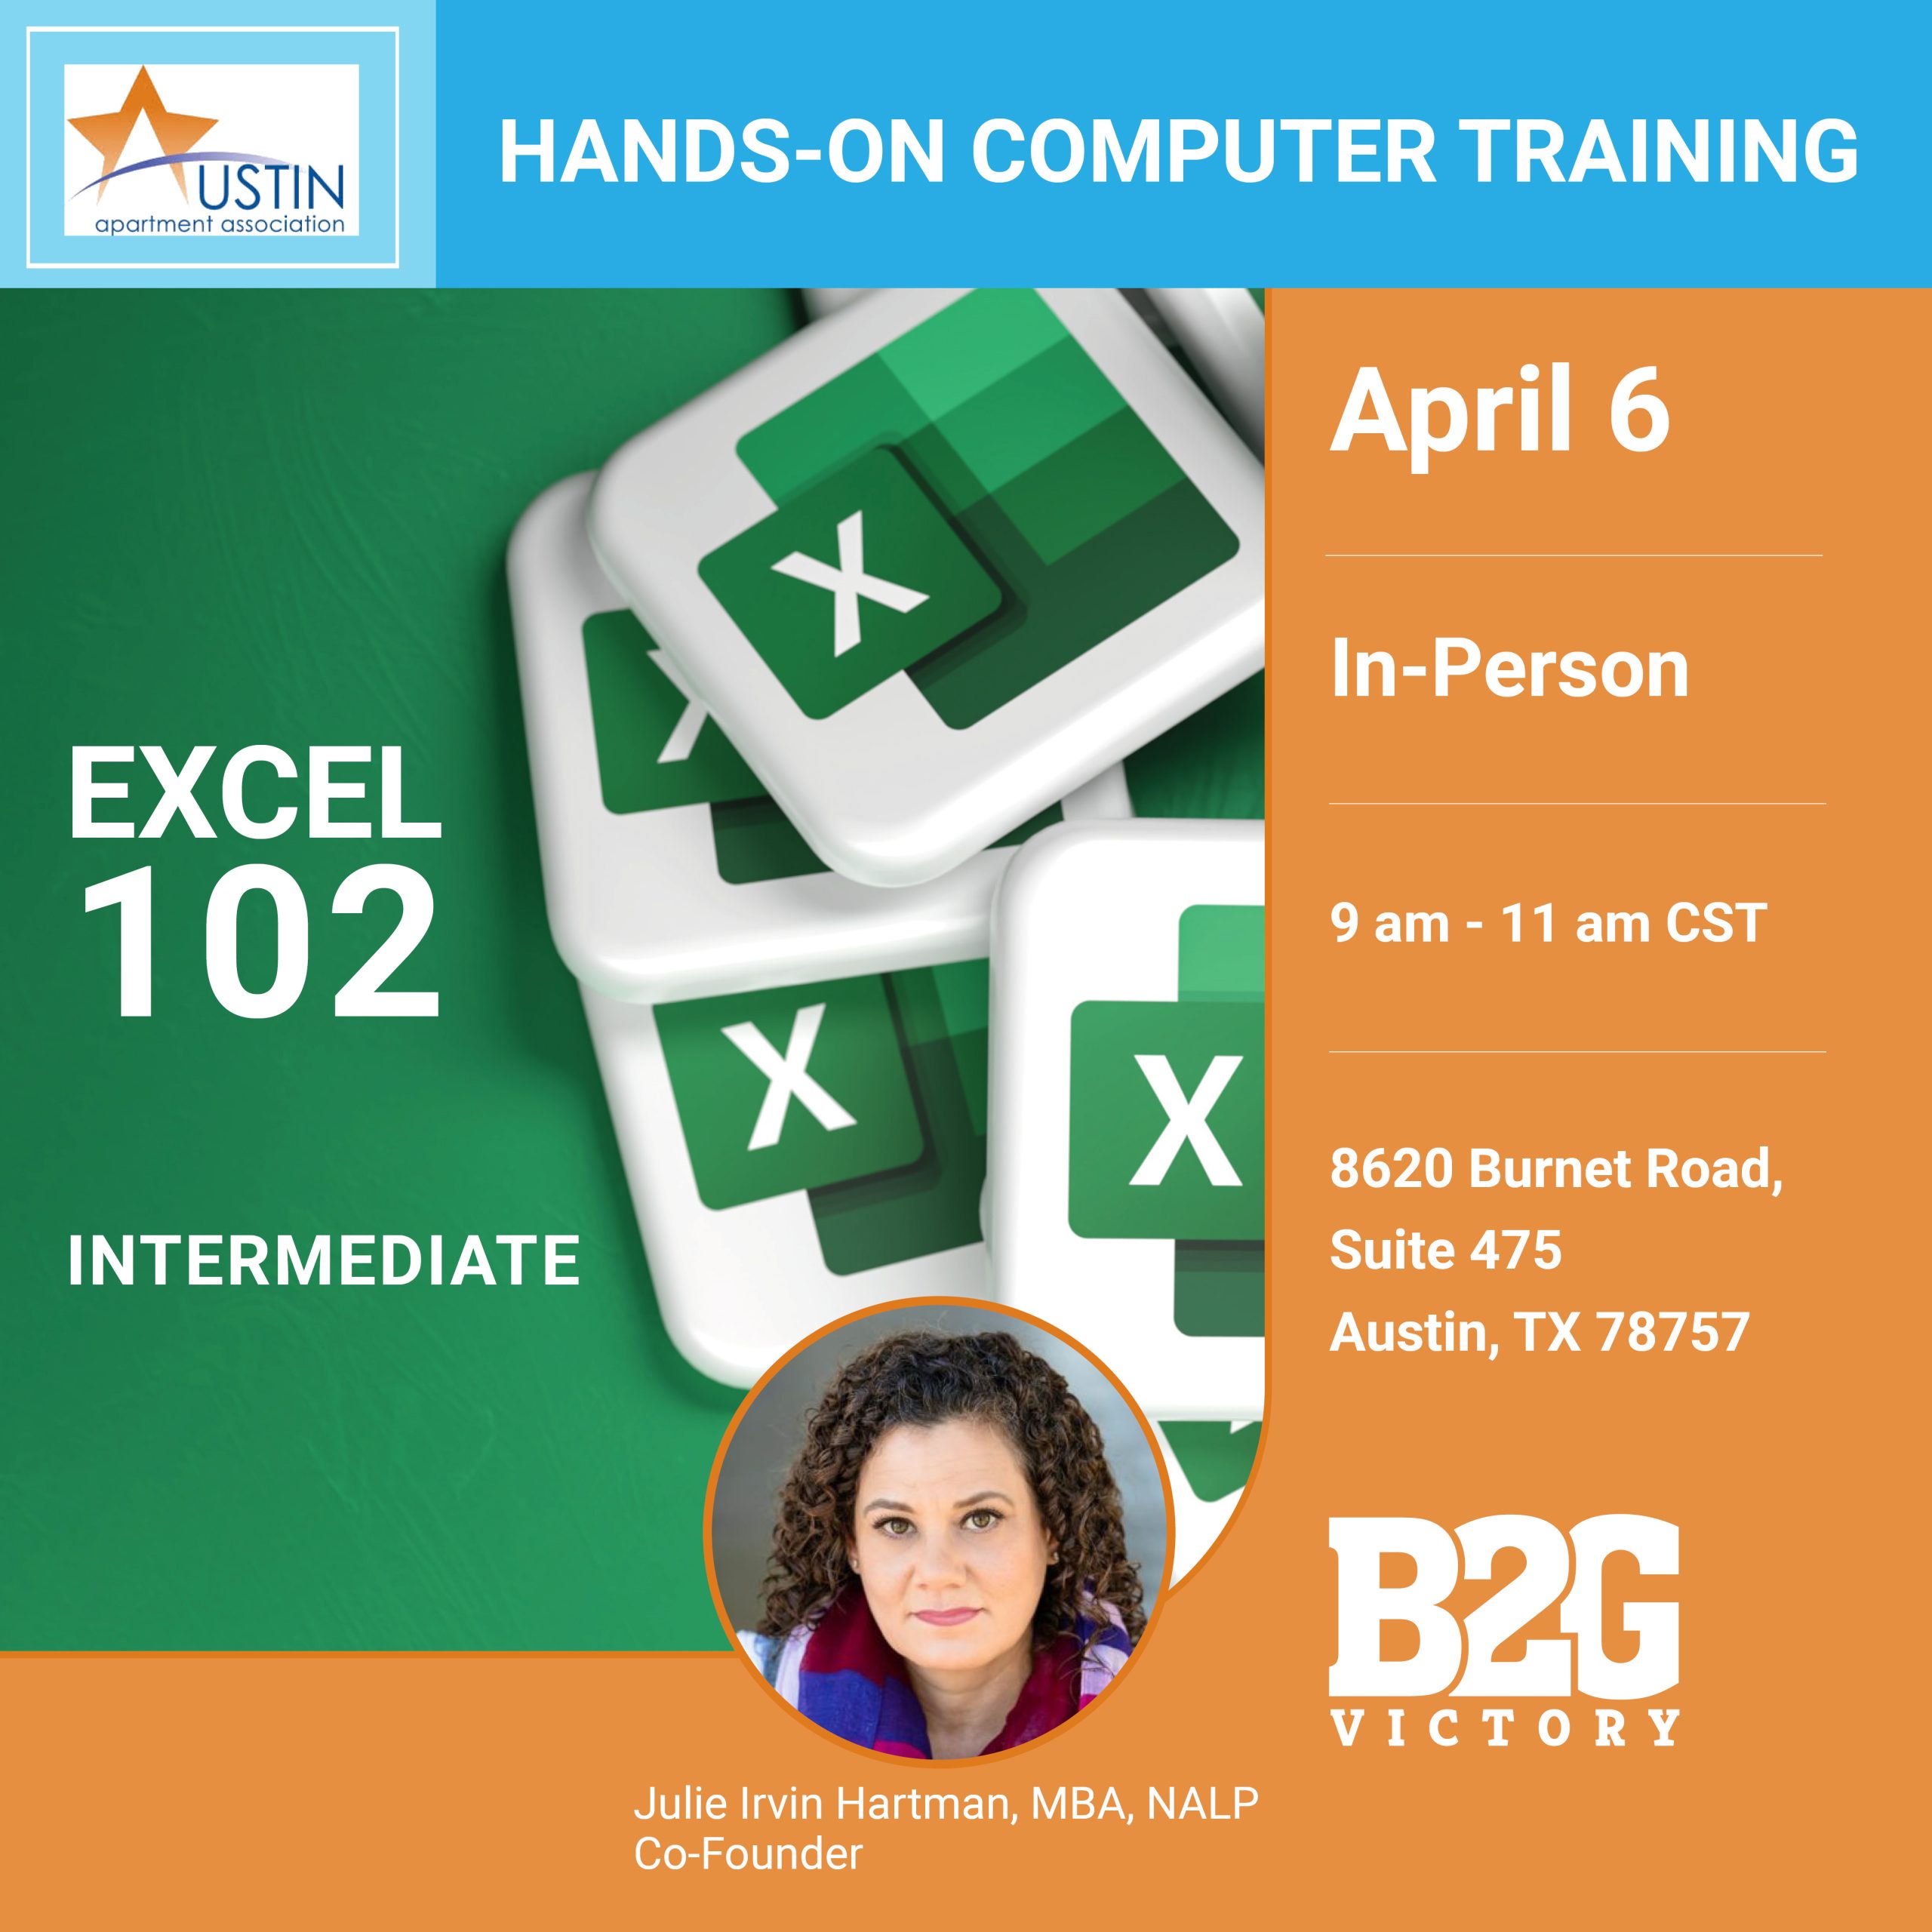 Excel 102 training in-person for the Austin Apartment Association on April 6, 2023